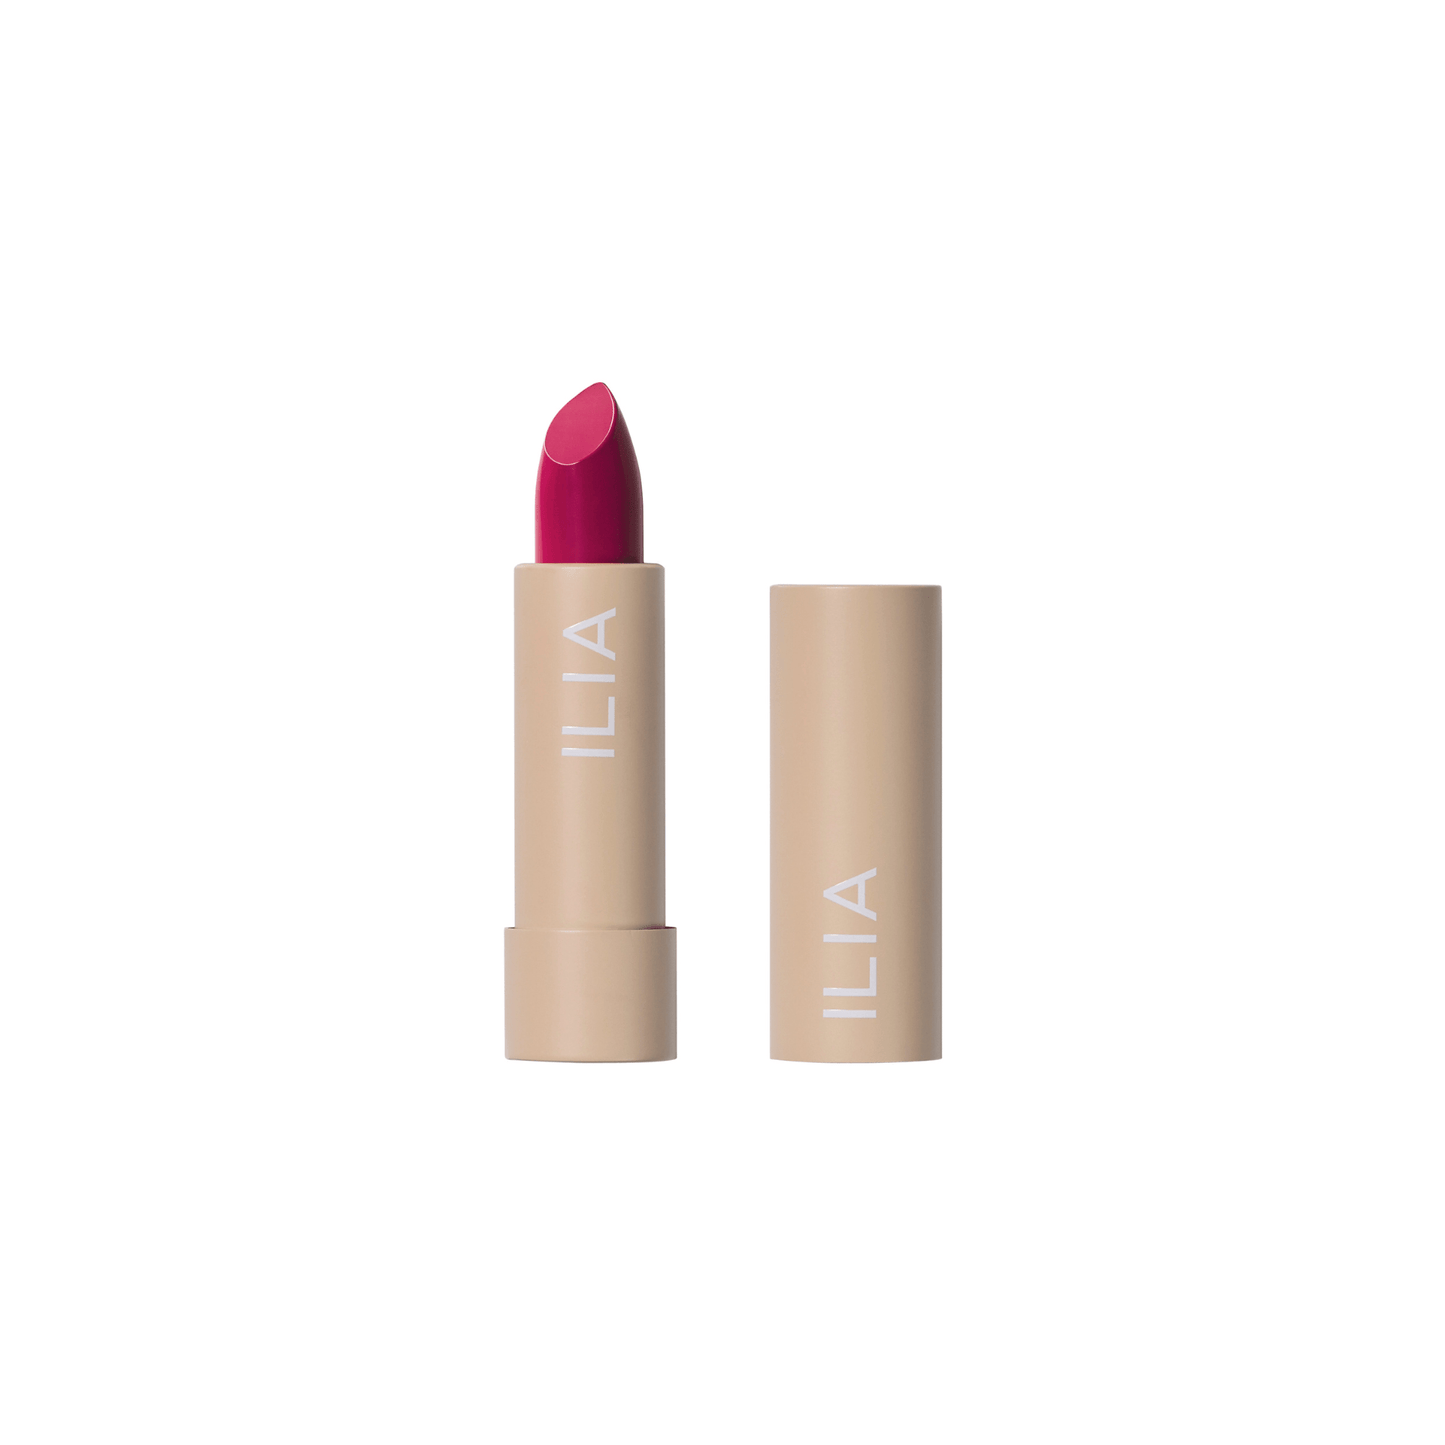 Primary Image of Color Block Lipstick in Knockout